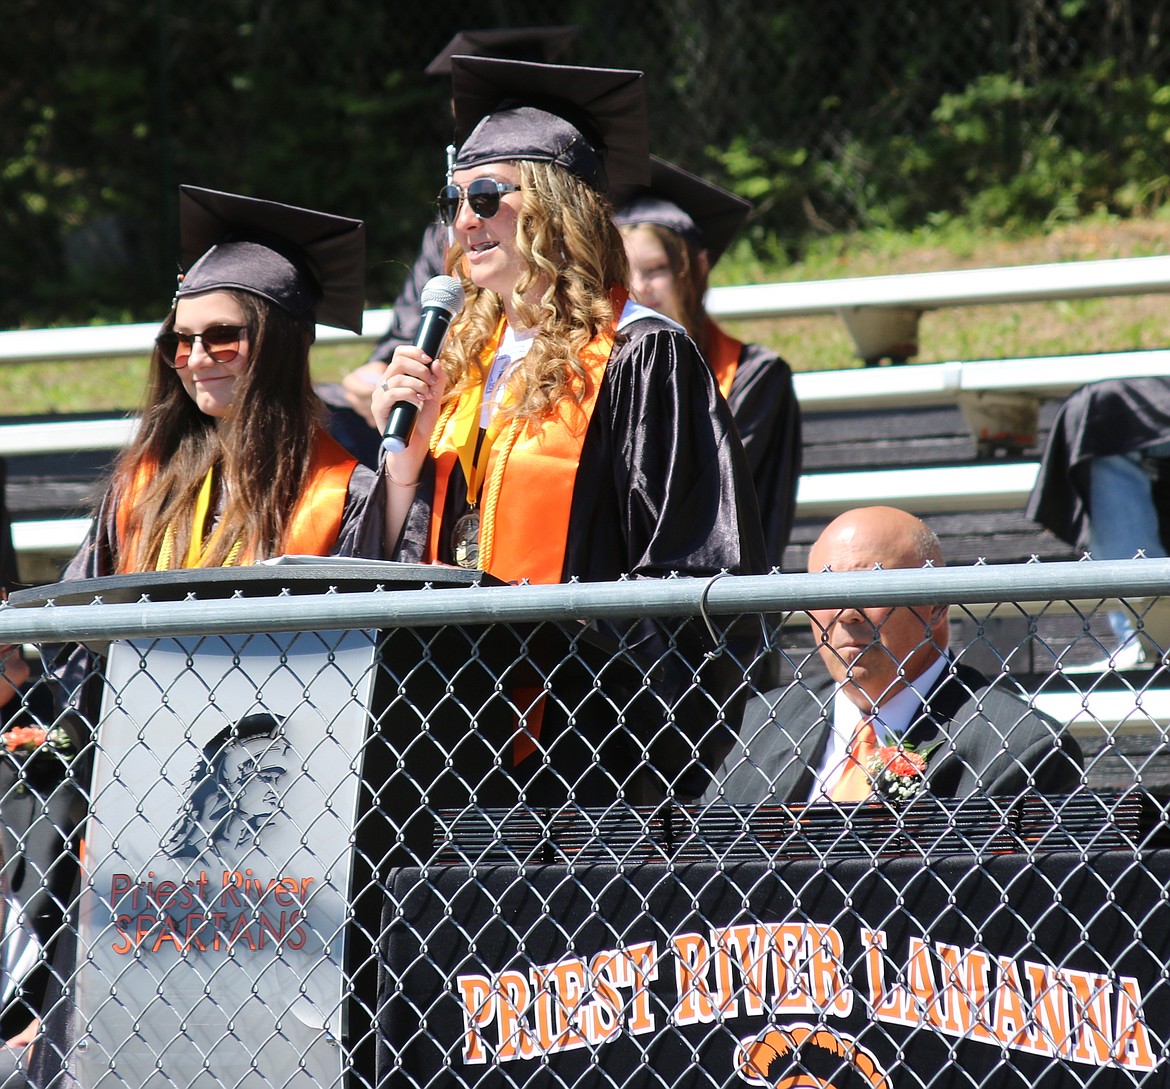 (Photo by ALY DE ANGELUS) 
 Priest River Lamanna High School celebrated their senior students in a socially distanced, COVID-19 approved graduation on July 11 at 10 a.m. PRLHS held the final graduation of the season, and the only school in Bonner County to have wait for a "traditional" outdoor-style event.